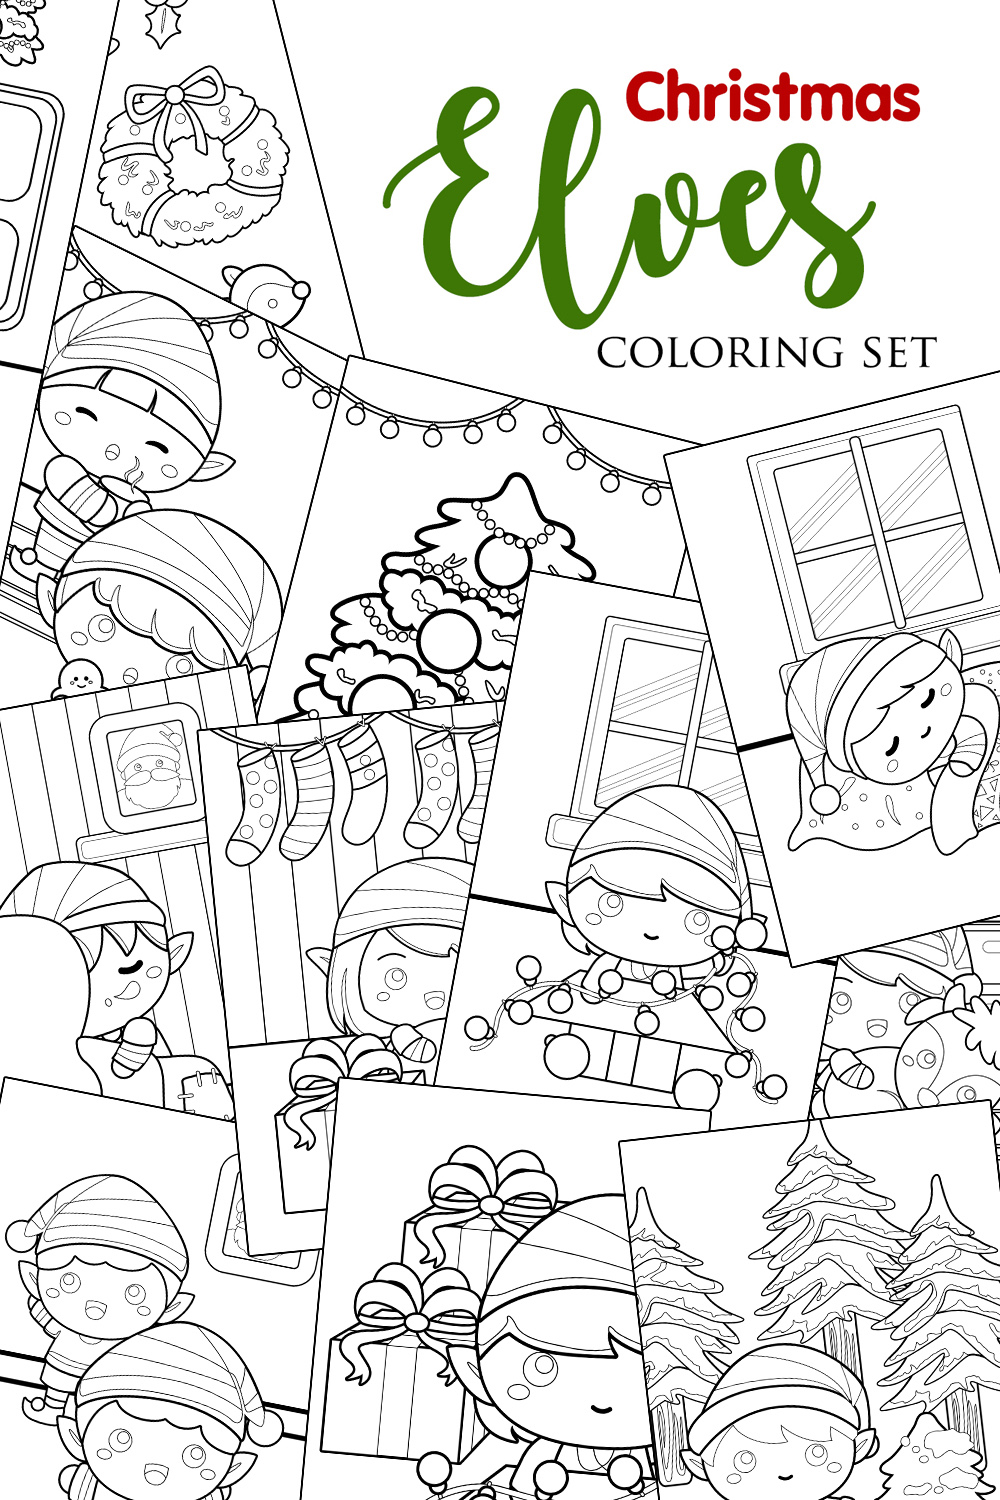 Cute Christmas Elf Kids Boy and Girl at Home and Decoration Outline Coloring Pages Activity pinterest preview image.